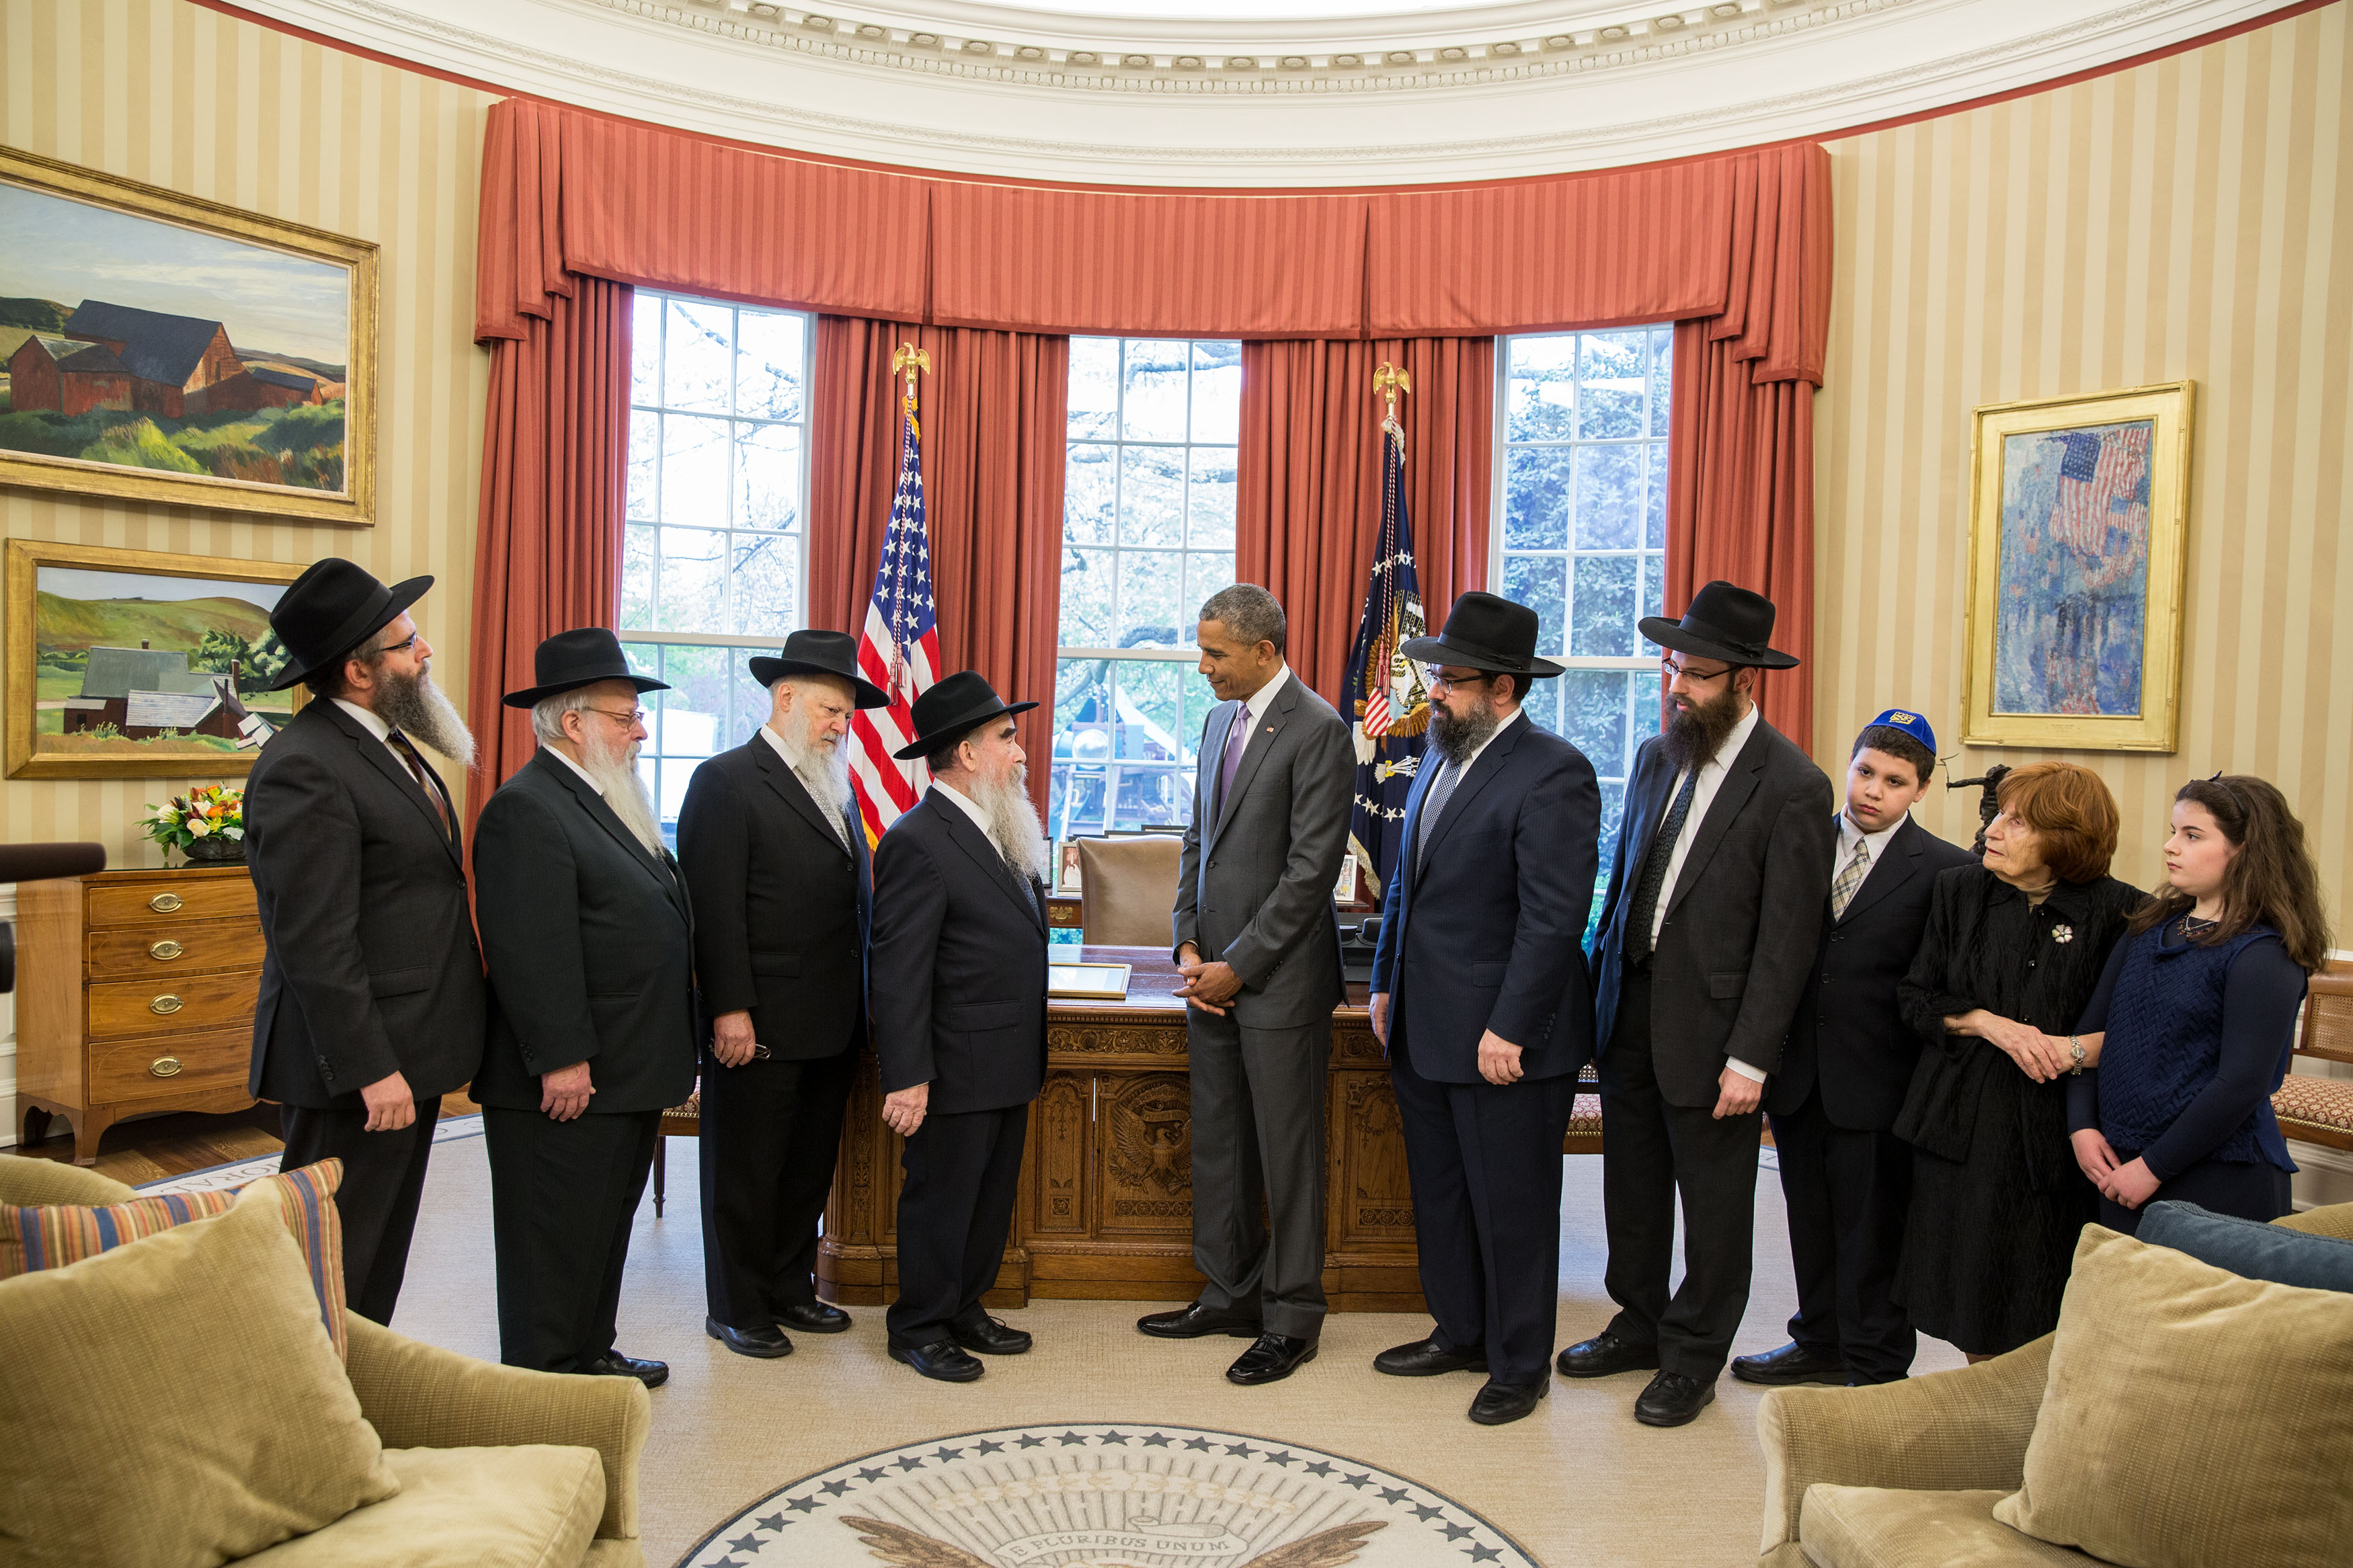 President Obama presents a ceremonial copy of the Education and Sharing Day Proclamation to a delegation from the American Friends of Lubavitch